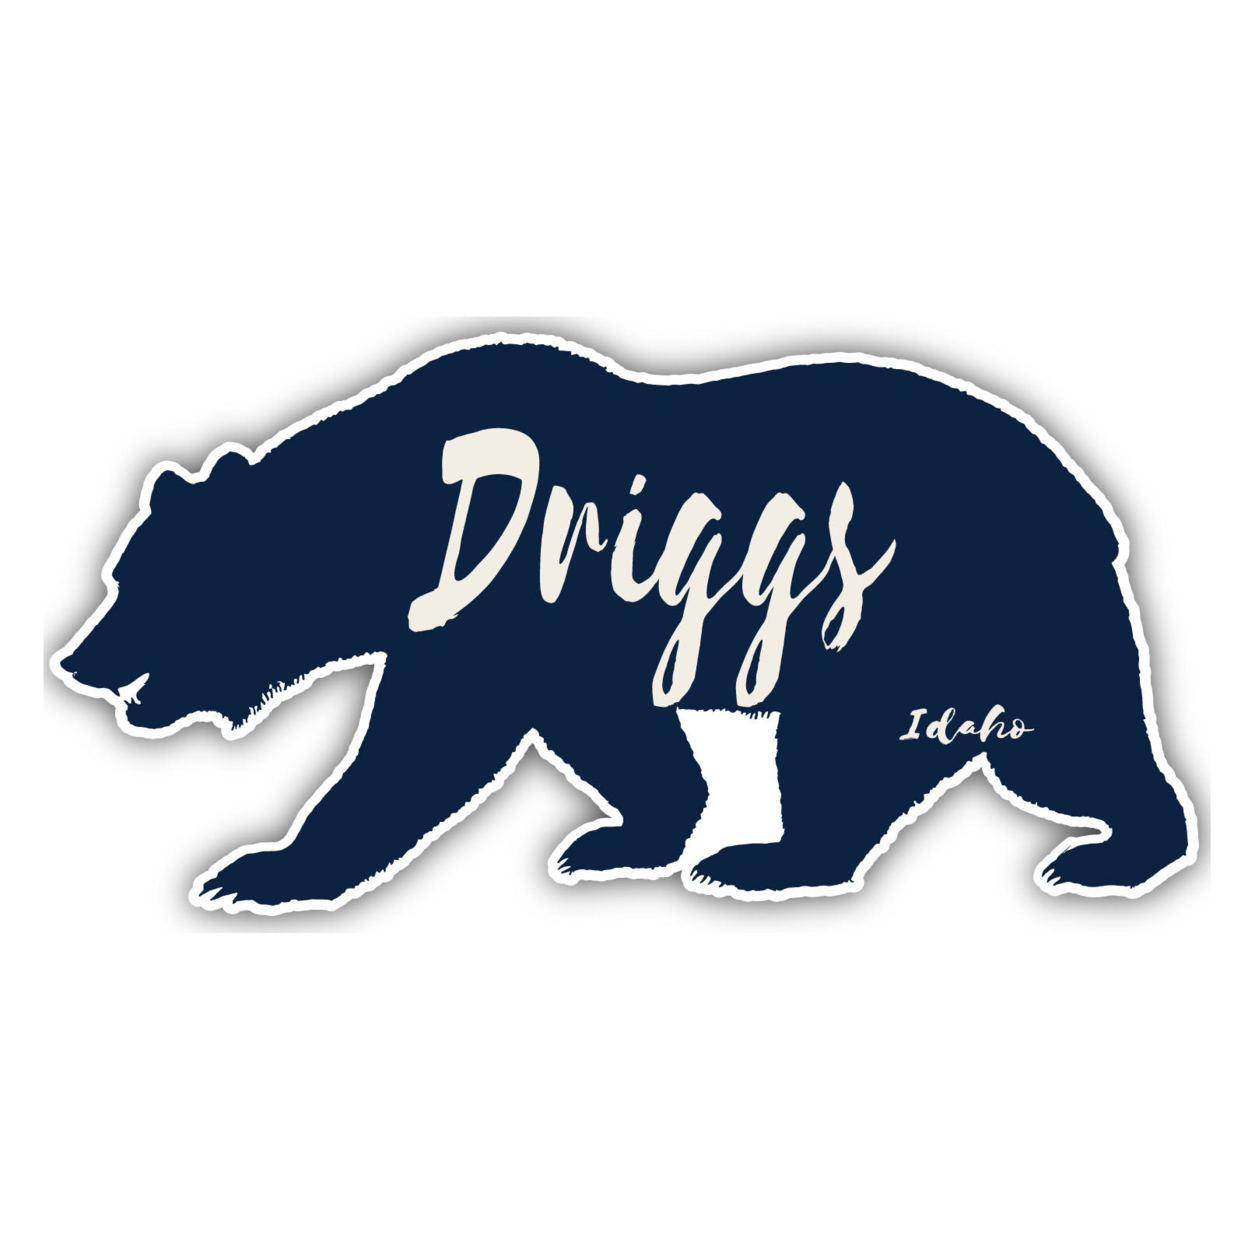 Driggs Idaho Souvenir Decorative Stickers (Choose Theme And Size) - 4-Pack, 12-Inch, Tent